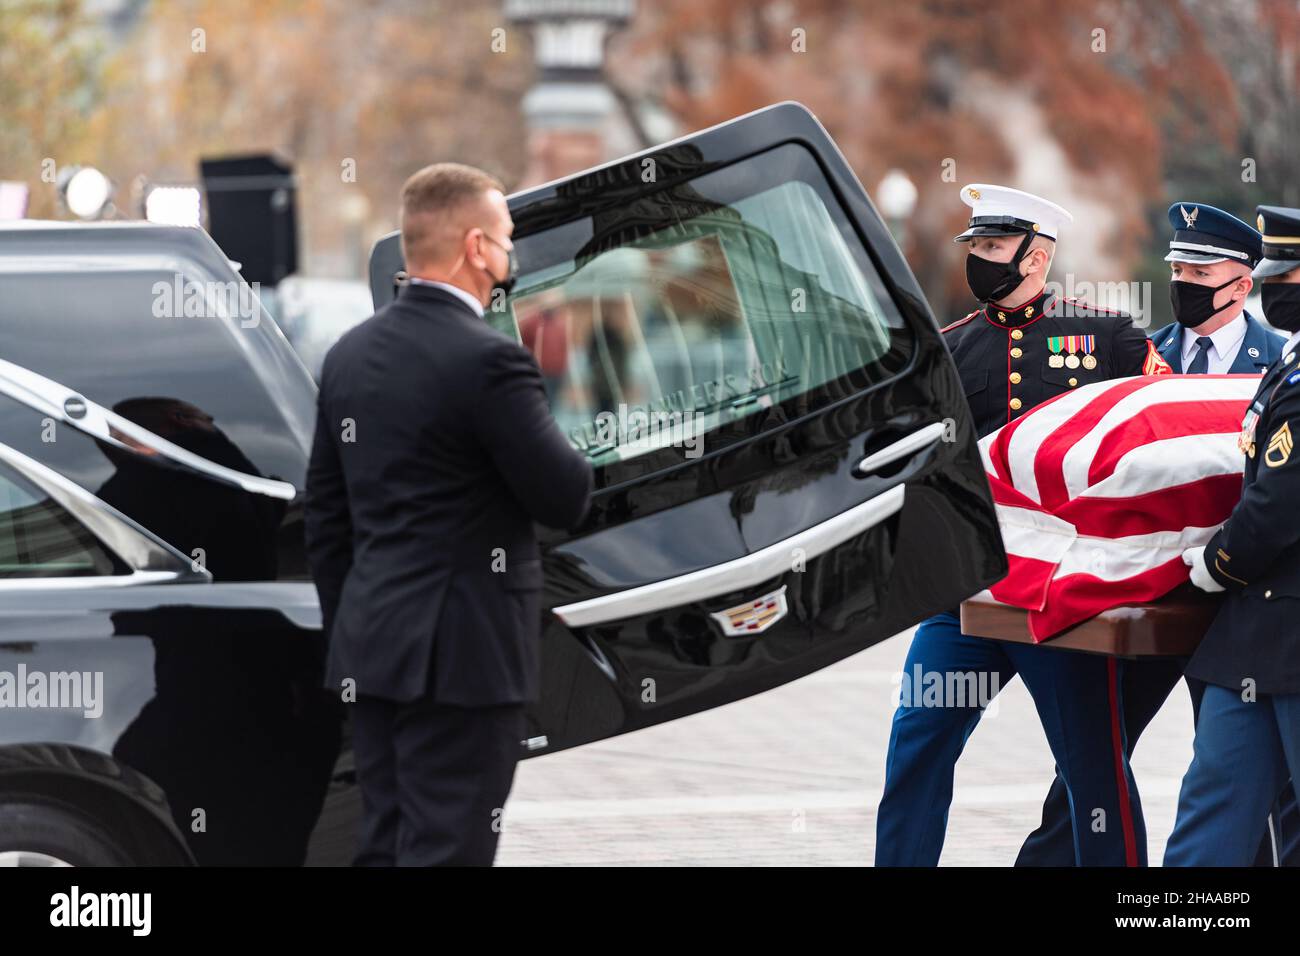 A Joint Casket Team places the flag-draped casket of World War II veteran and former Senator Robert J. Dole into a hearse at the U.S. Capitol, Washington, D.C., Dec. 10, 2021. After a funeral service and commemoration at the World War II Memorial, Dole’s remains will travel to Kansas one last time before returning to Washington, D.C., for burial.    (U.S. Army photo by Sgt. Zachery Perkins) Stock Photo